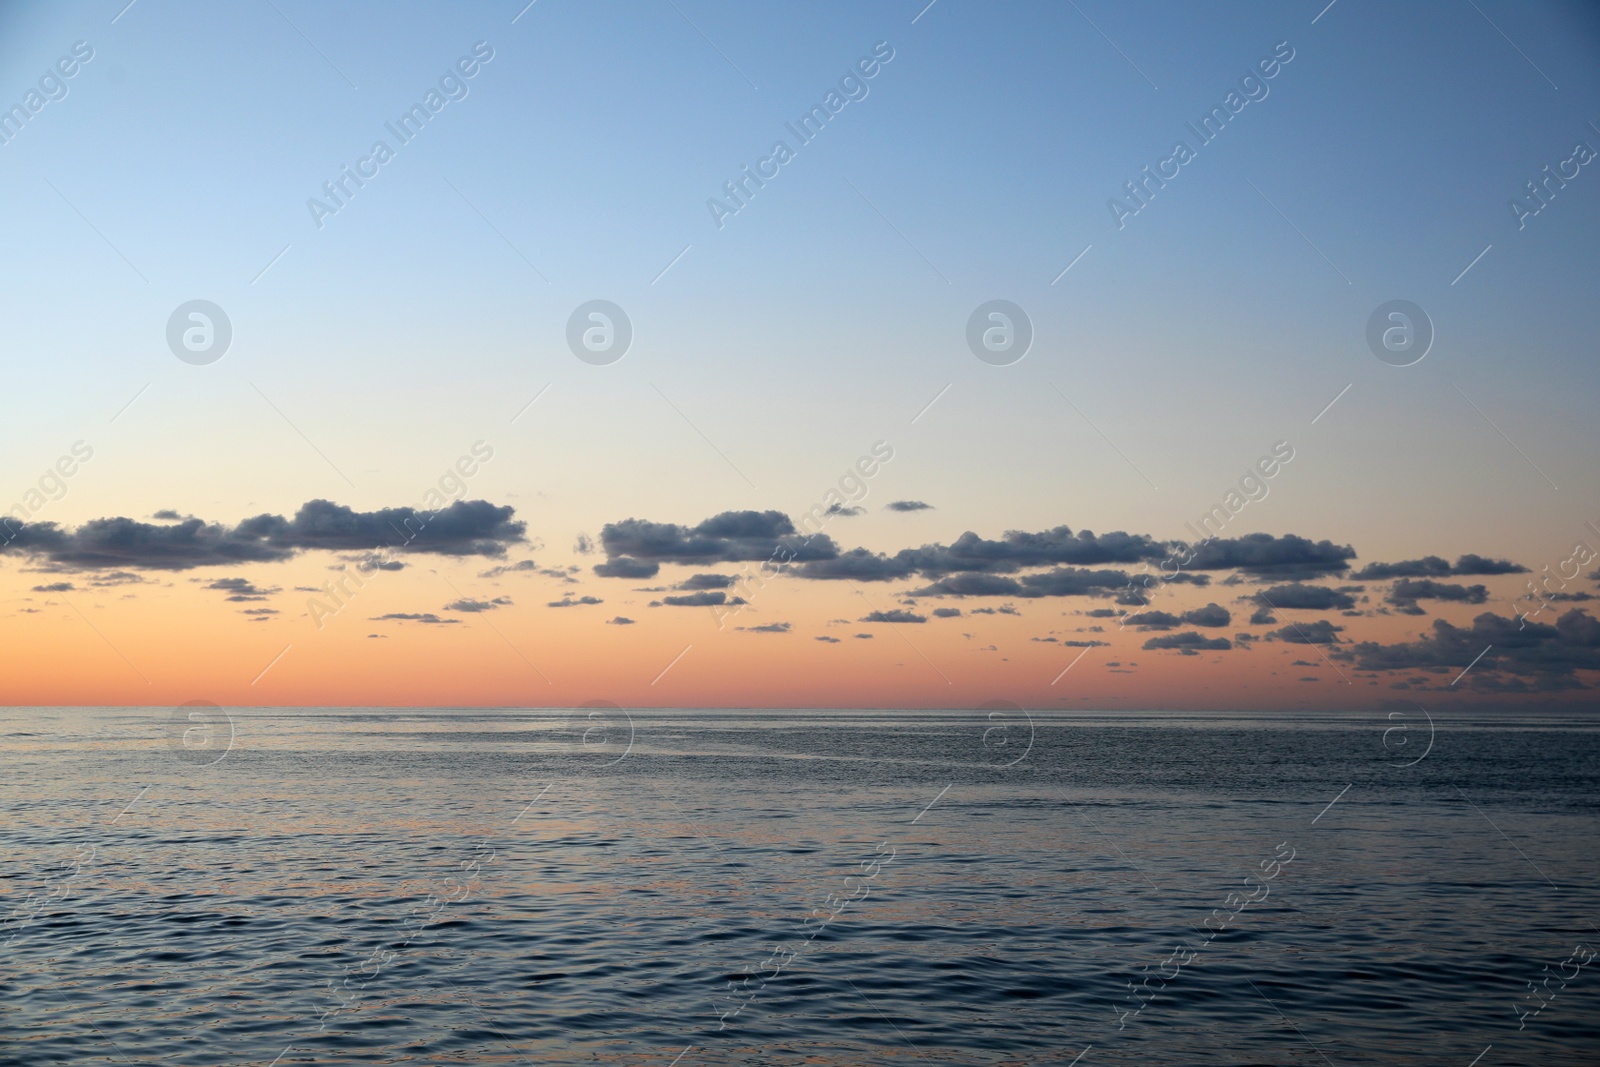 Photo of Picturesque view of sea under beautiful sky at sunset